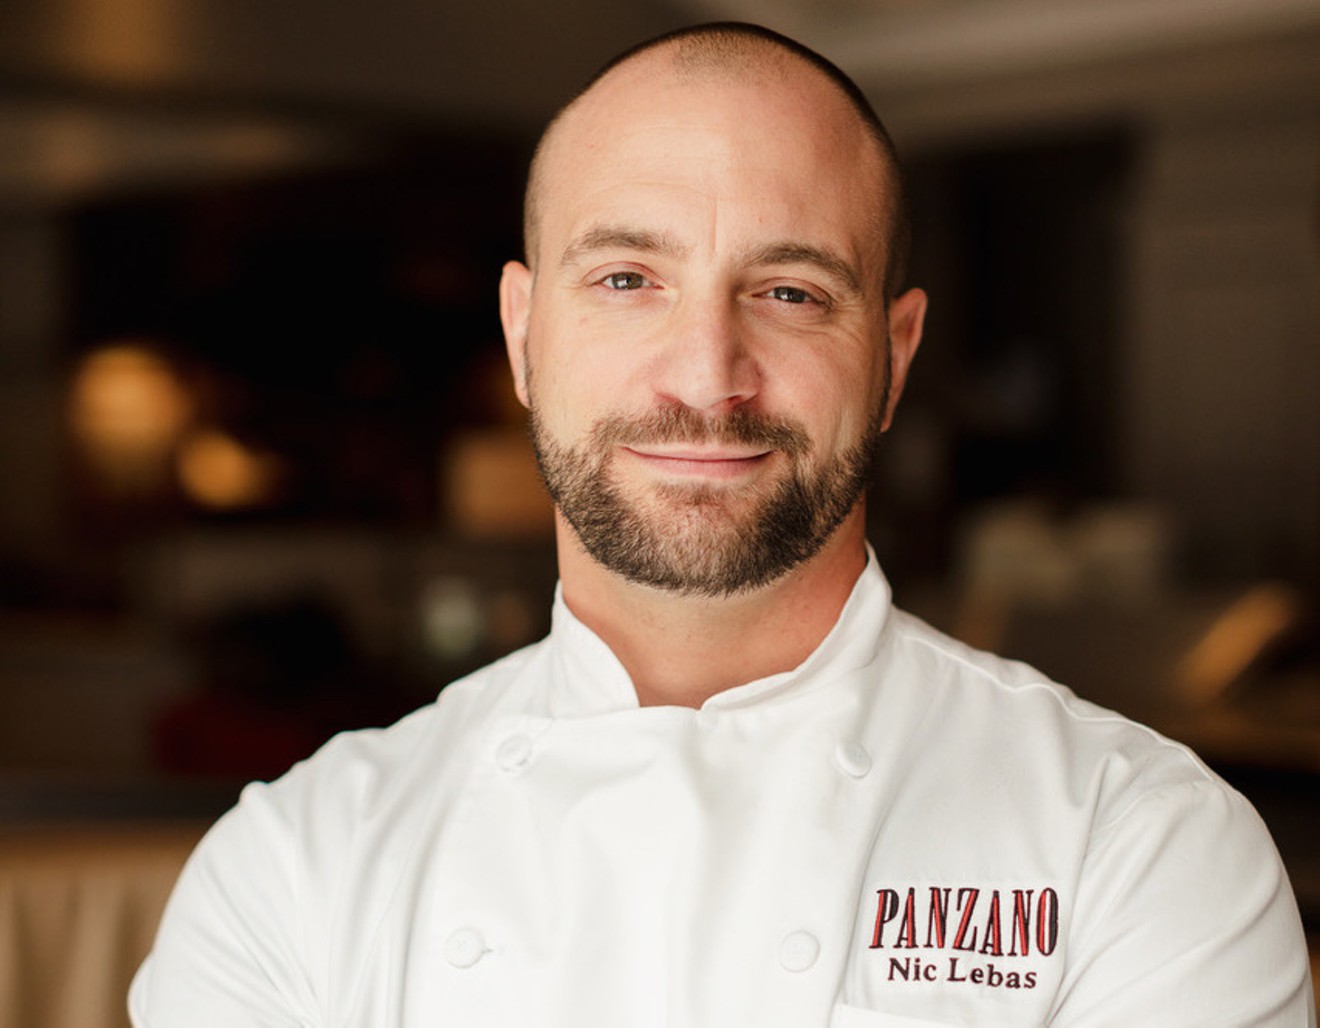 Nic Lebas will preserve Panzano’s legacy while drawing on his French roots.